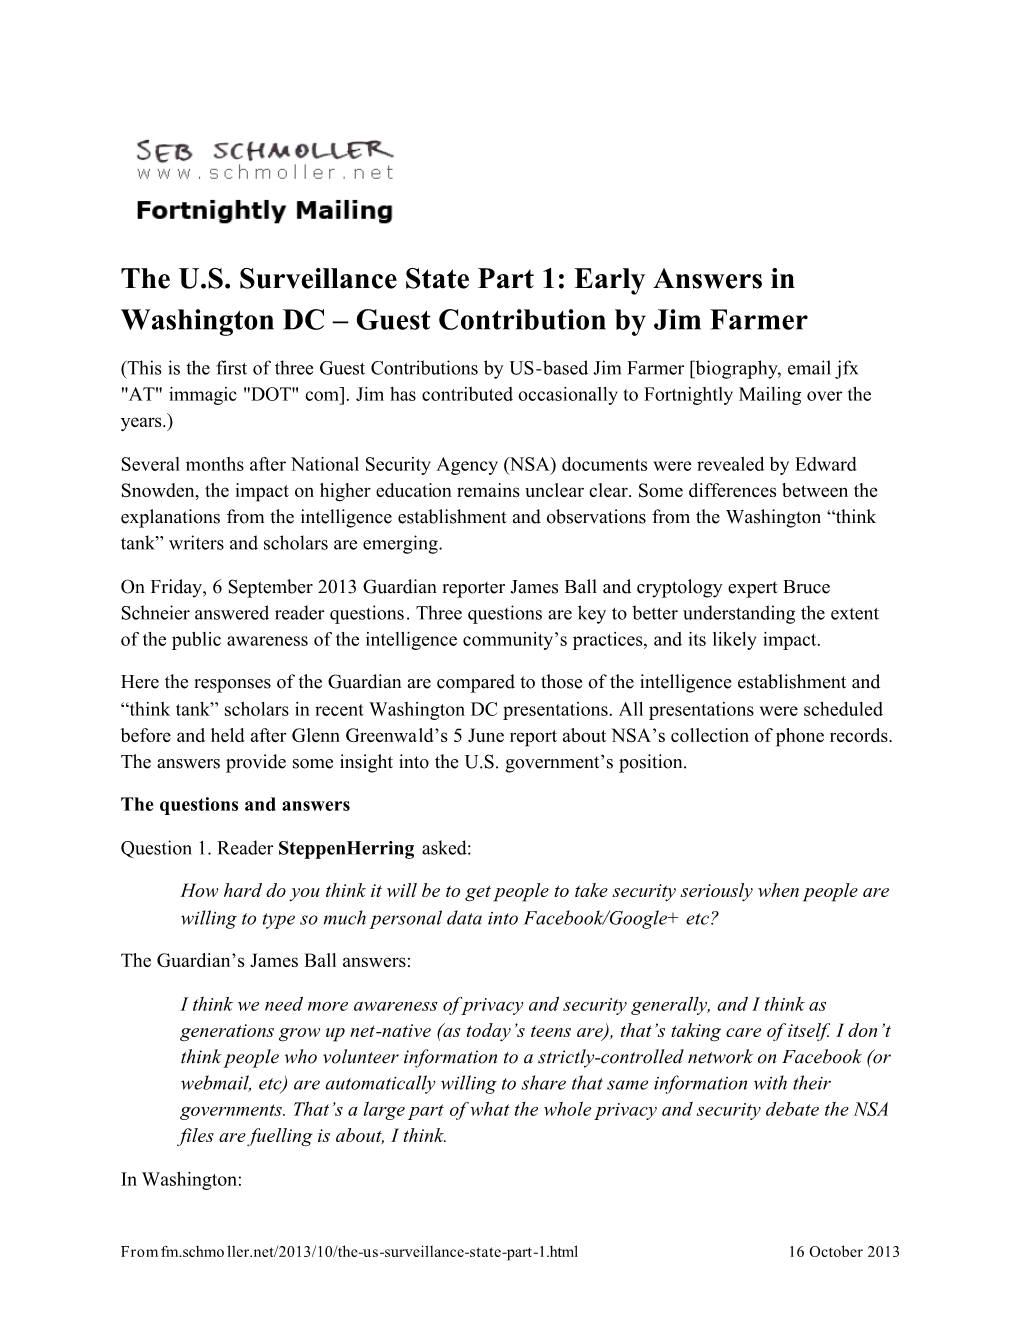 The U.S. Surveillance State Part 1: Early Answers in Washington DC – Guest Contribution by Jim Farmer